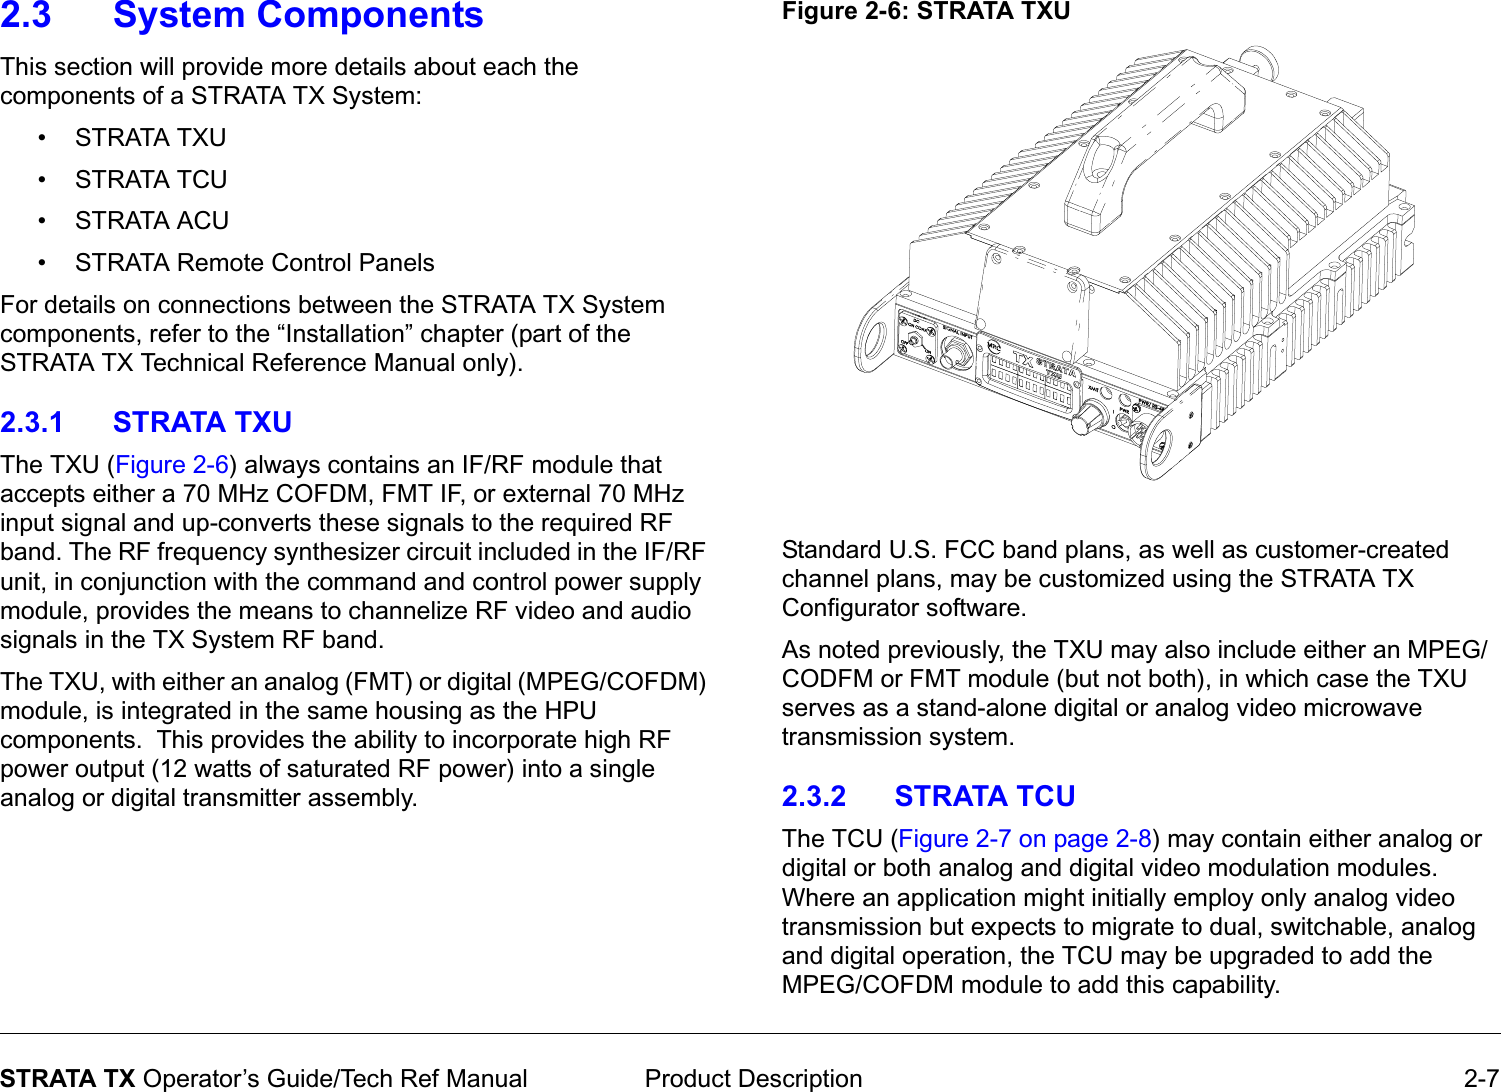  Product Description 2-7STRATA TX Operator’s Guide/Tech Ref Manual2.3 System ComponentsThis section will provide more details about each the components of a STRATA TX System:•STRATA TXU • STRATA TCU •STRATA ACU• STRATA Remote Control PanelsFor details on connections between the STRATA TX System components, refer to the “Installation” chapter (part of the STRATA TX Technical Reference Manual only).2.3.1 STRATA TXUThe TXU (Figure 2-6) always contains an IF/RF module that accepts either a 70 MHz COFDM, FMT IF, or external 70 MHz input signal and up-converts these signals to the required RF band. The RF frequency synthesizer circuit included in the IF/RF unit, in conjunction with the command and control power supply module, provides the means to channelize RF video and audio signals in the TX System RF band.The TXU, with either an analog (FMT) or digital (MPEG/COFDM) module, is integrated in the same housing as the HPU components.  This provides the ability to incorporate high RF power output (12 watts of saturated RF power) into a single analog or digital transmitter assembly.Figure 2-6: STRATA TXUStandard U.S. FCC band plans, as well as customer-created channel plans, may be customized using the STRATA TX Configurator software.As noted previously, the TXU may also include either an MPEG/CODFM or FMT module (but not both), in which case the TXU serves as a stand-alone digital or analog video microwave transmission system. 2.3.2 STRATA TCUThe TCU (Figure 2-7 on page 2-8) may contain either analog or digital or both analog and digital video modulation modules.   Where an application might initially employ only analog video transmission but expects to migrate to dual, switchable, analog and digital operation, the TCU may be upgraded to add the MPEG/COFDM module to add this capability.